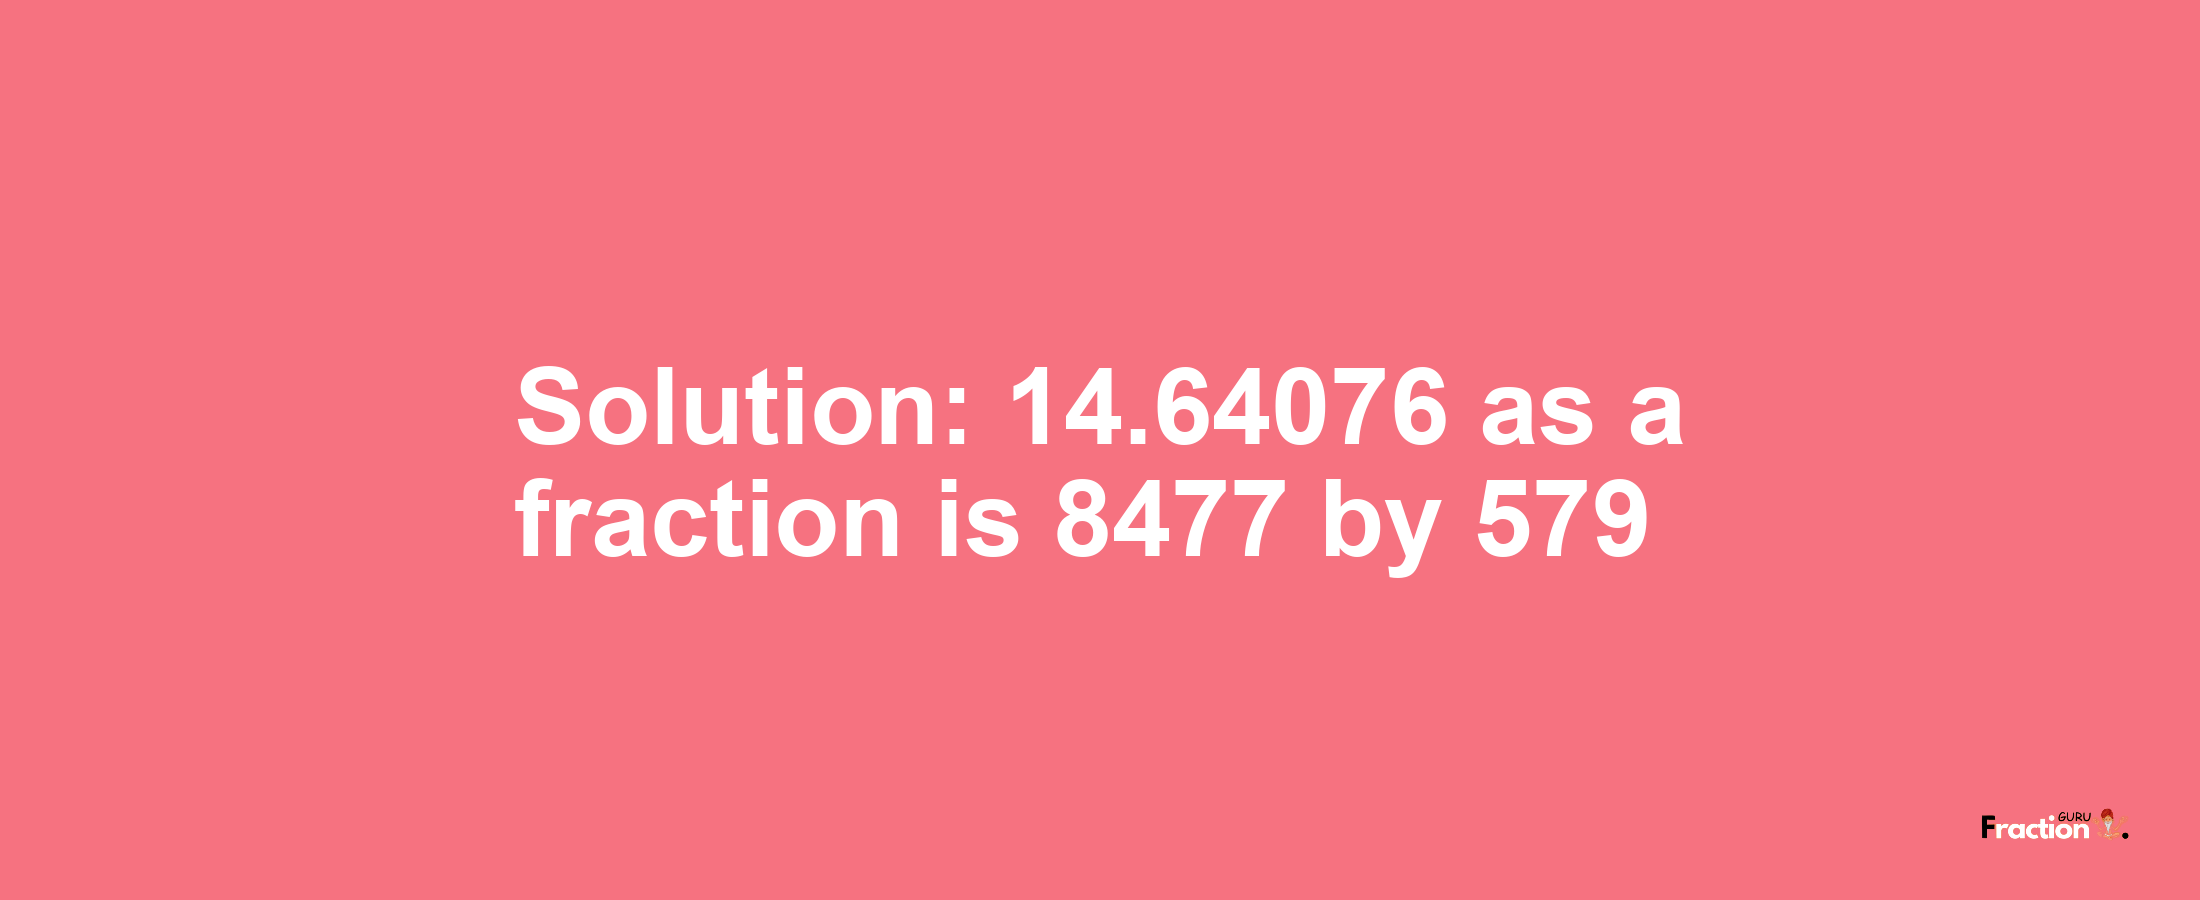 Solution:14.64076 as a fraction is 8477/579